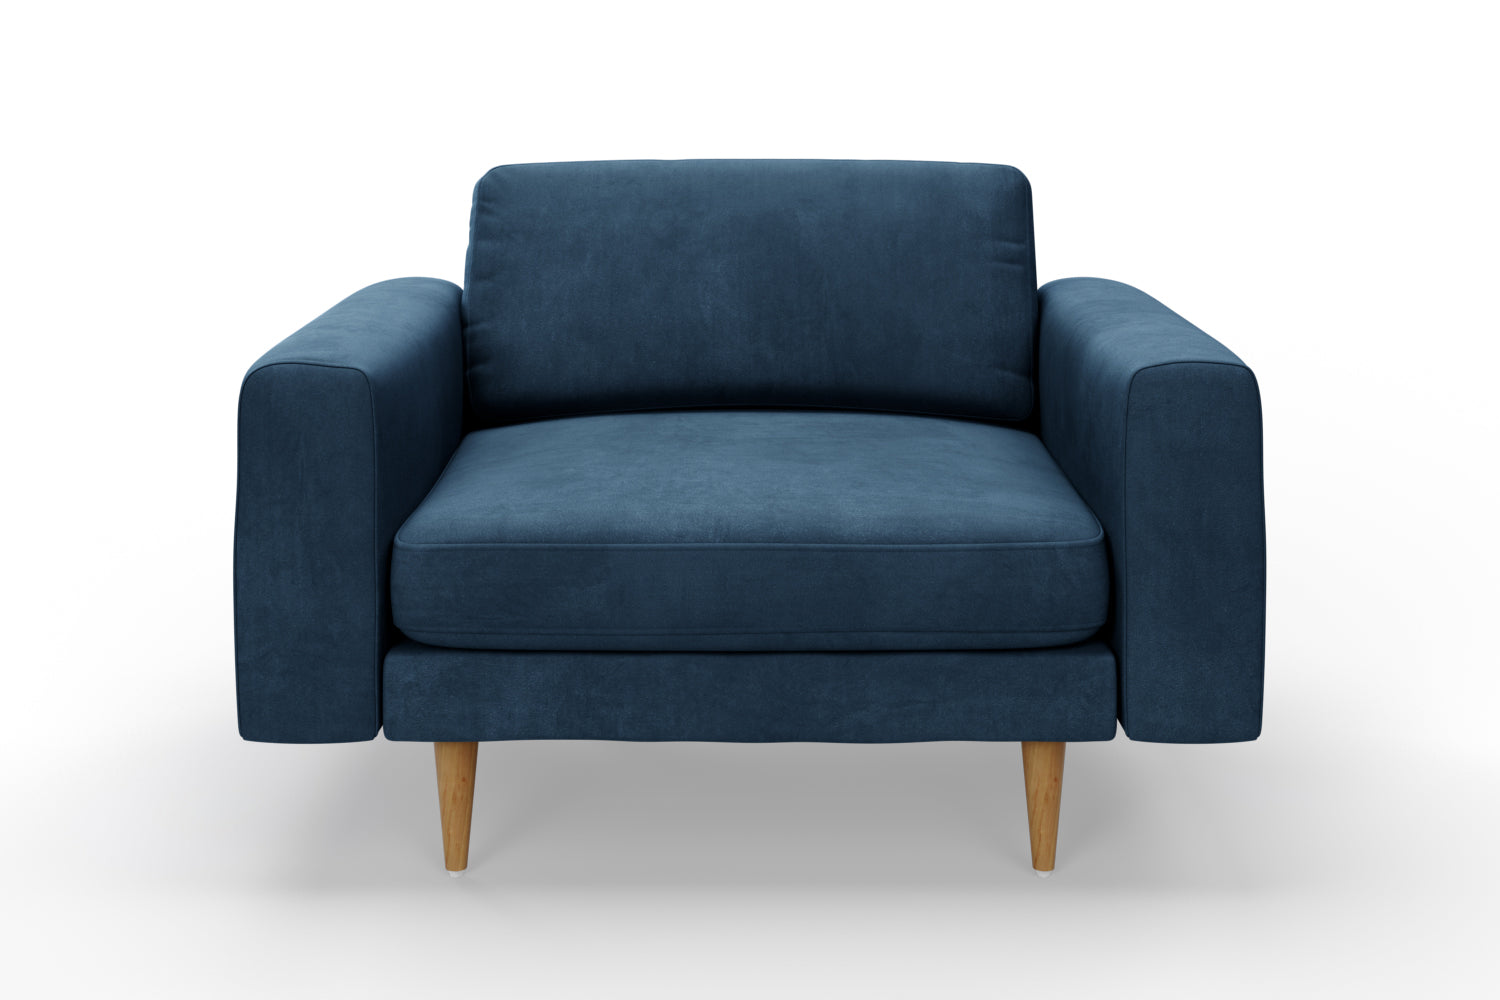 SNUG | The Big Chill 1.5 Seater Snuggler in Blue Steel variant_40414875418672